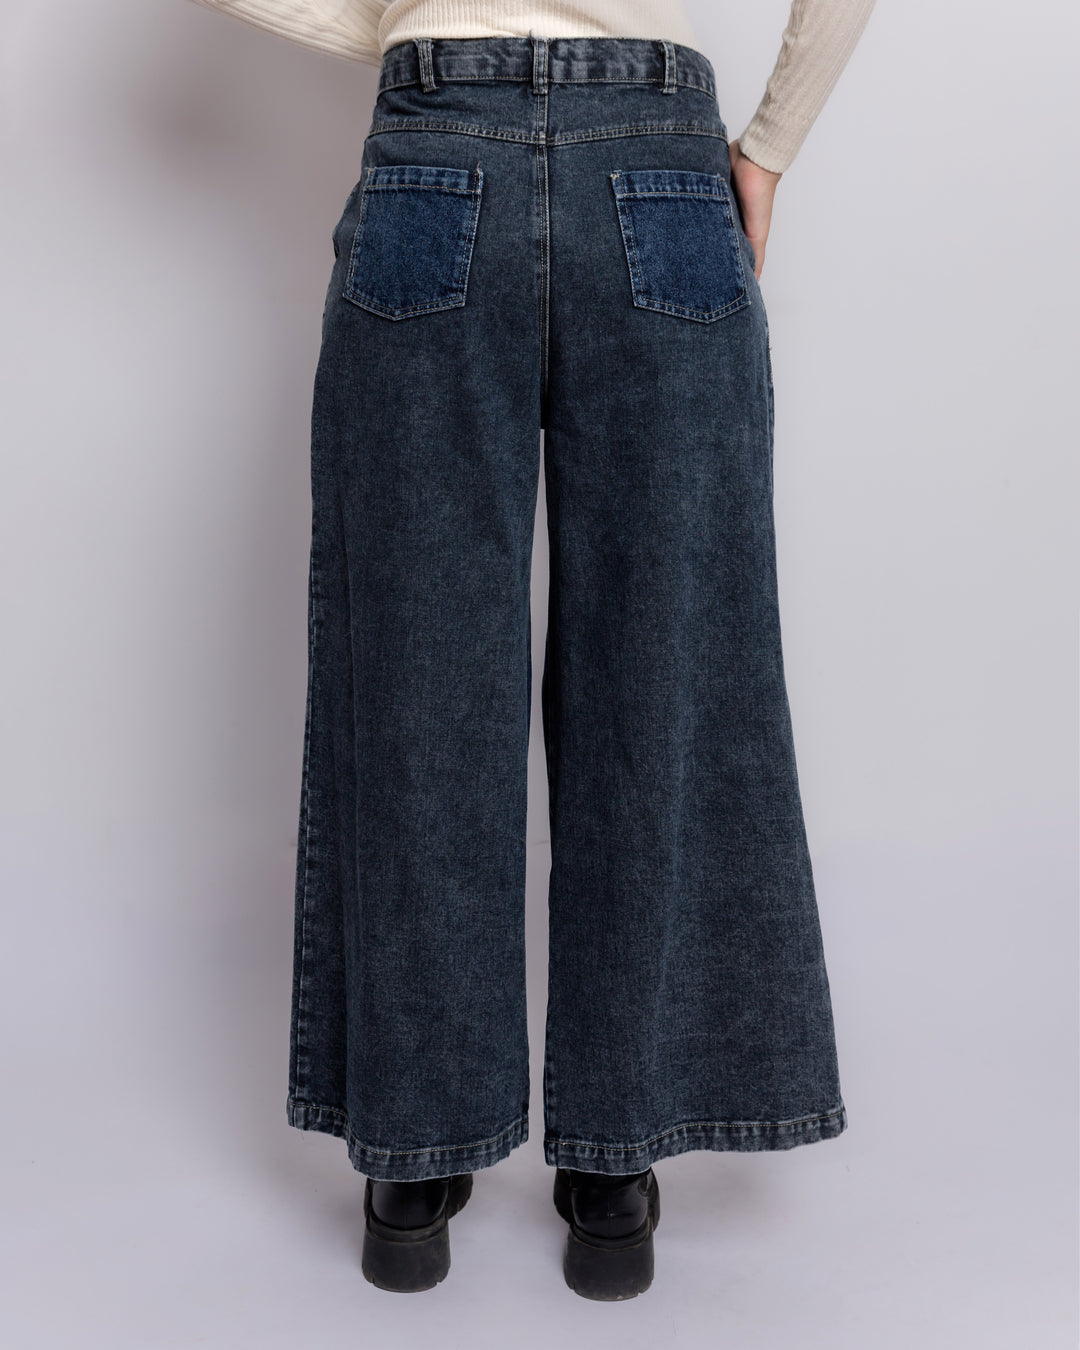 Black And Blue Wide Leg Denim Pants With Wide Front Pleat